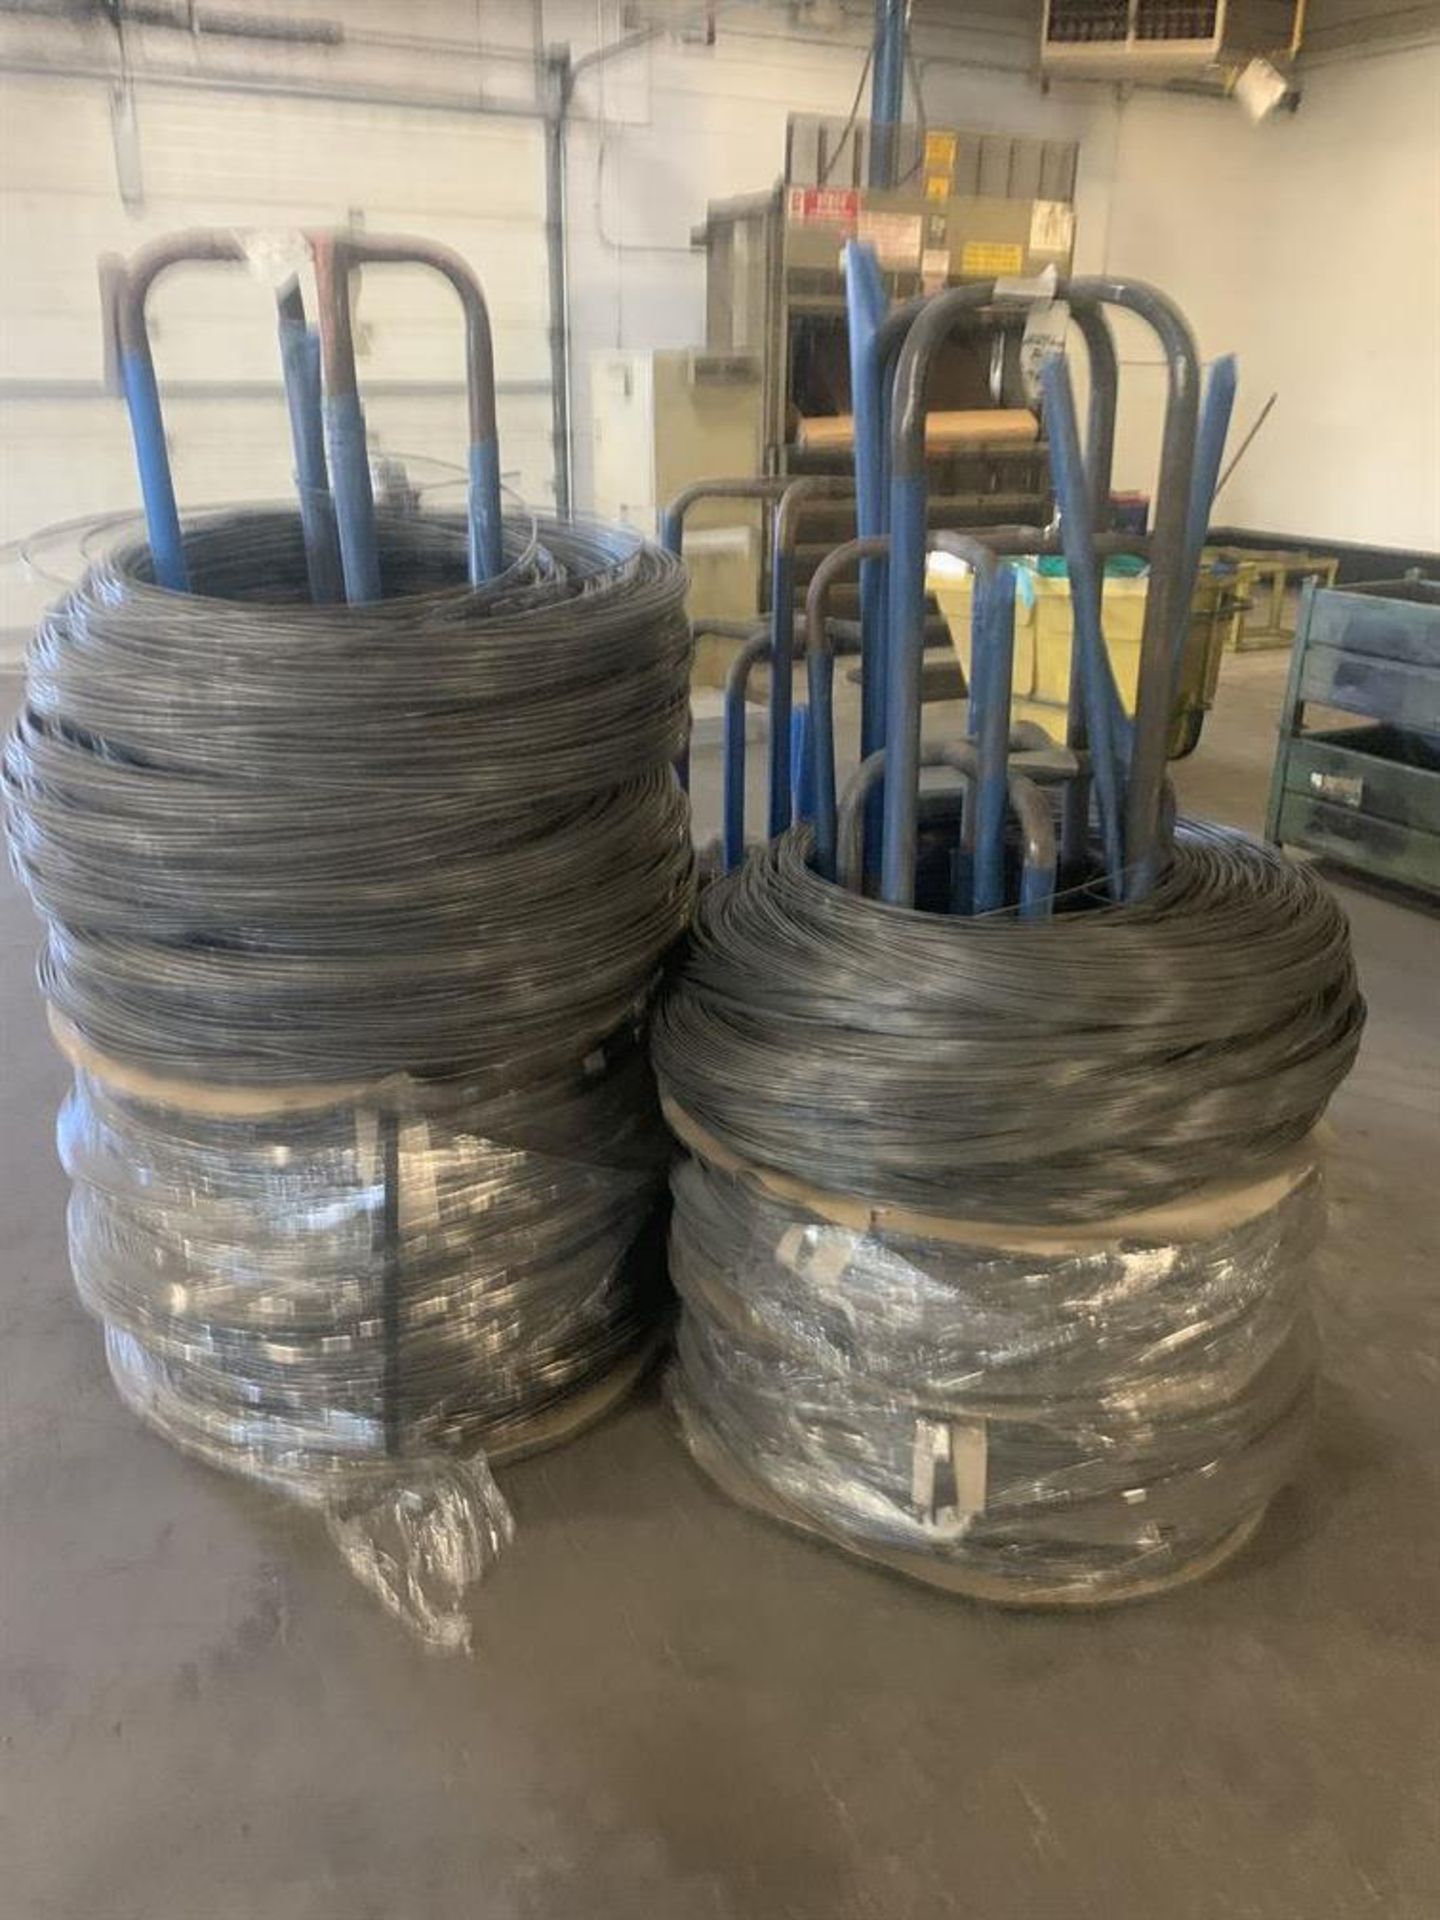 Lot of (3) Stacks of Wire Reels w/ 5/16" and 1/8" Round Coil Steel - Image 2 of 2